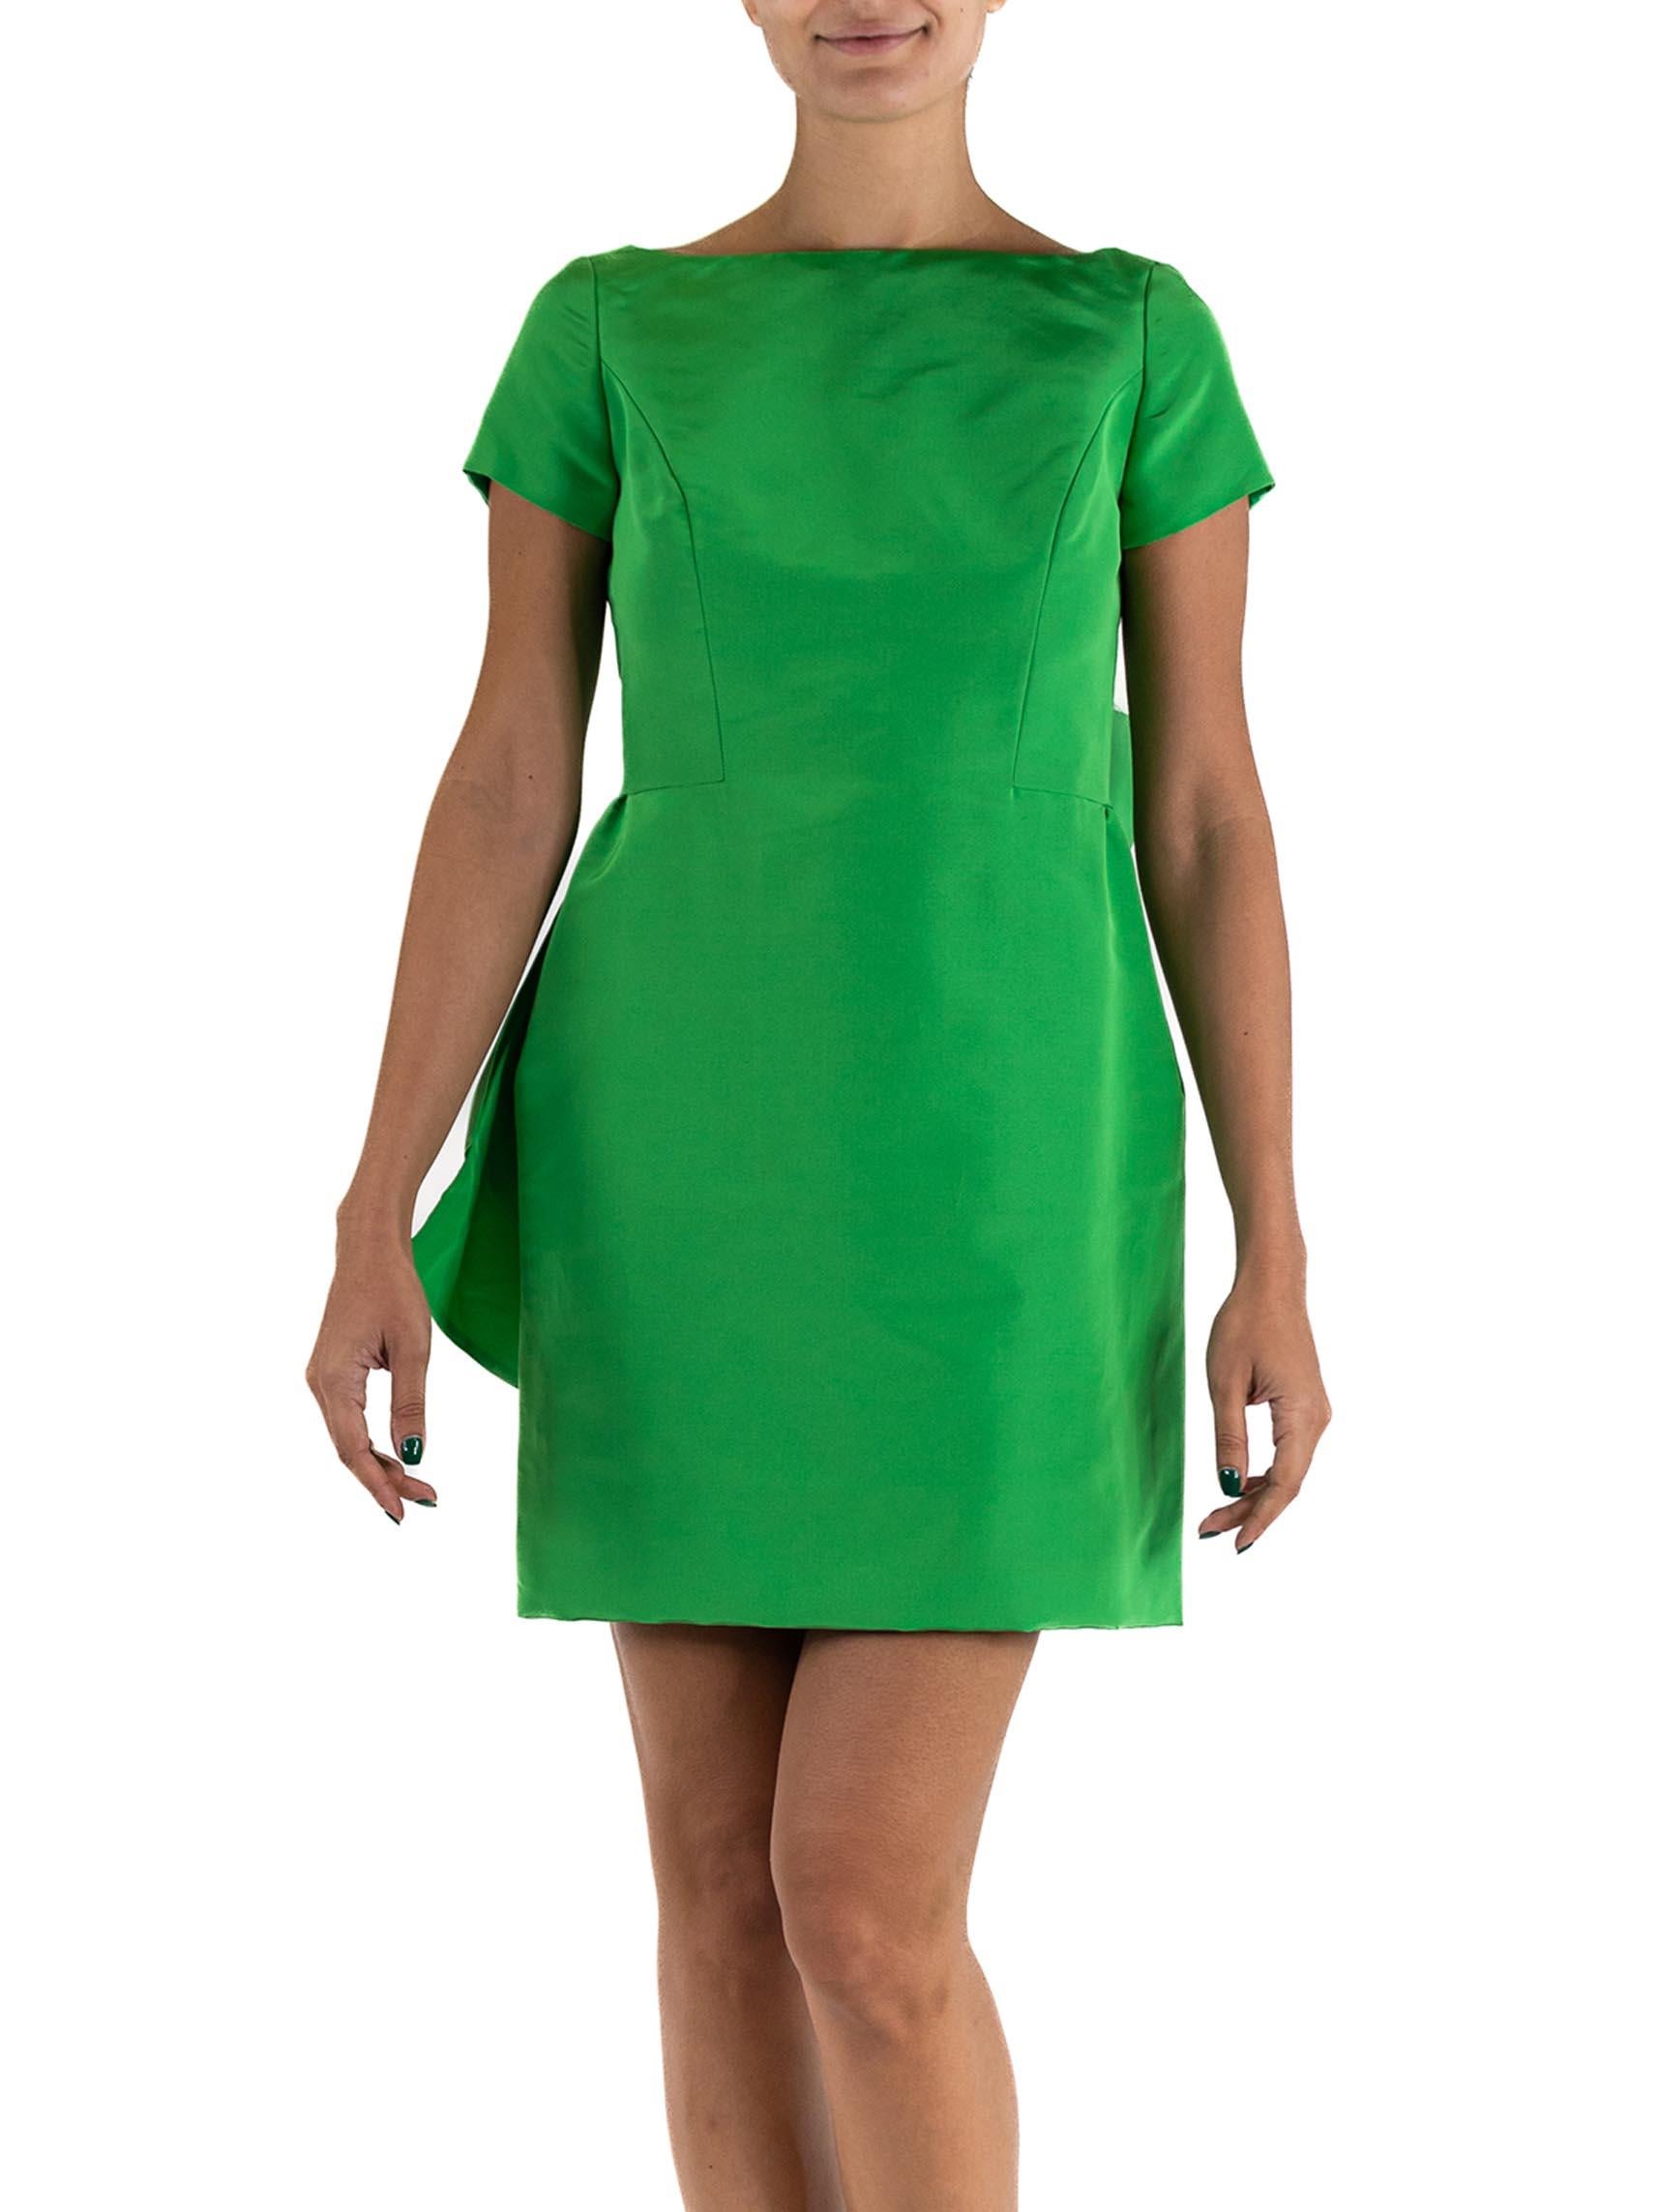 Fully lined with silk gazzar for structure. The finishing and construction on this dress is next level quality.  1990S ISAAC MIZRAHI Lime Green Silk Faille Cocktail Dress With Giant Bow Accent In Back 